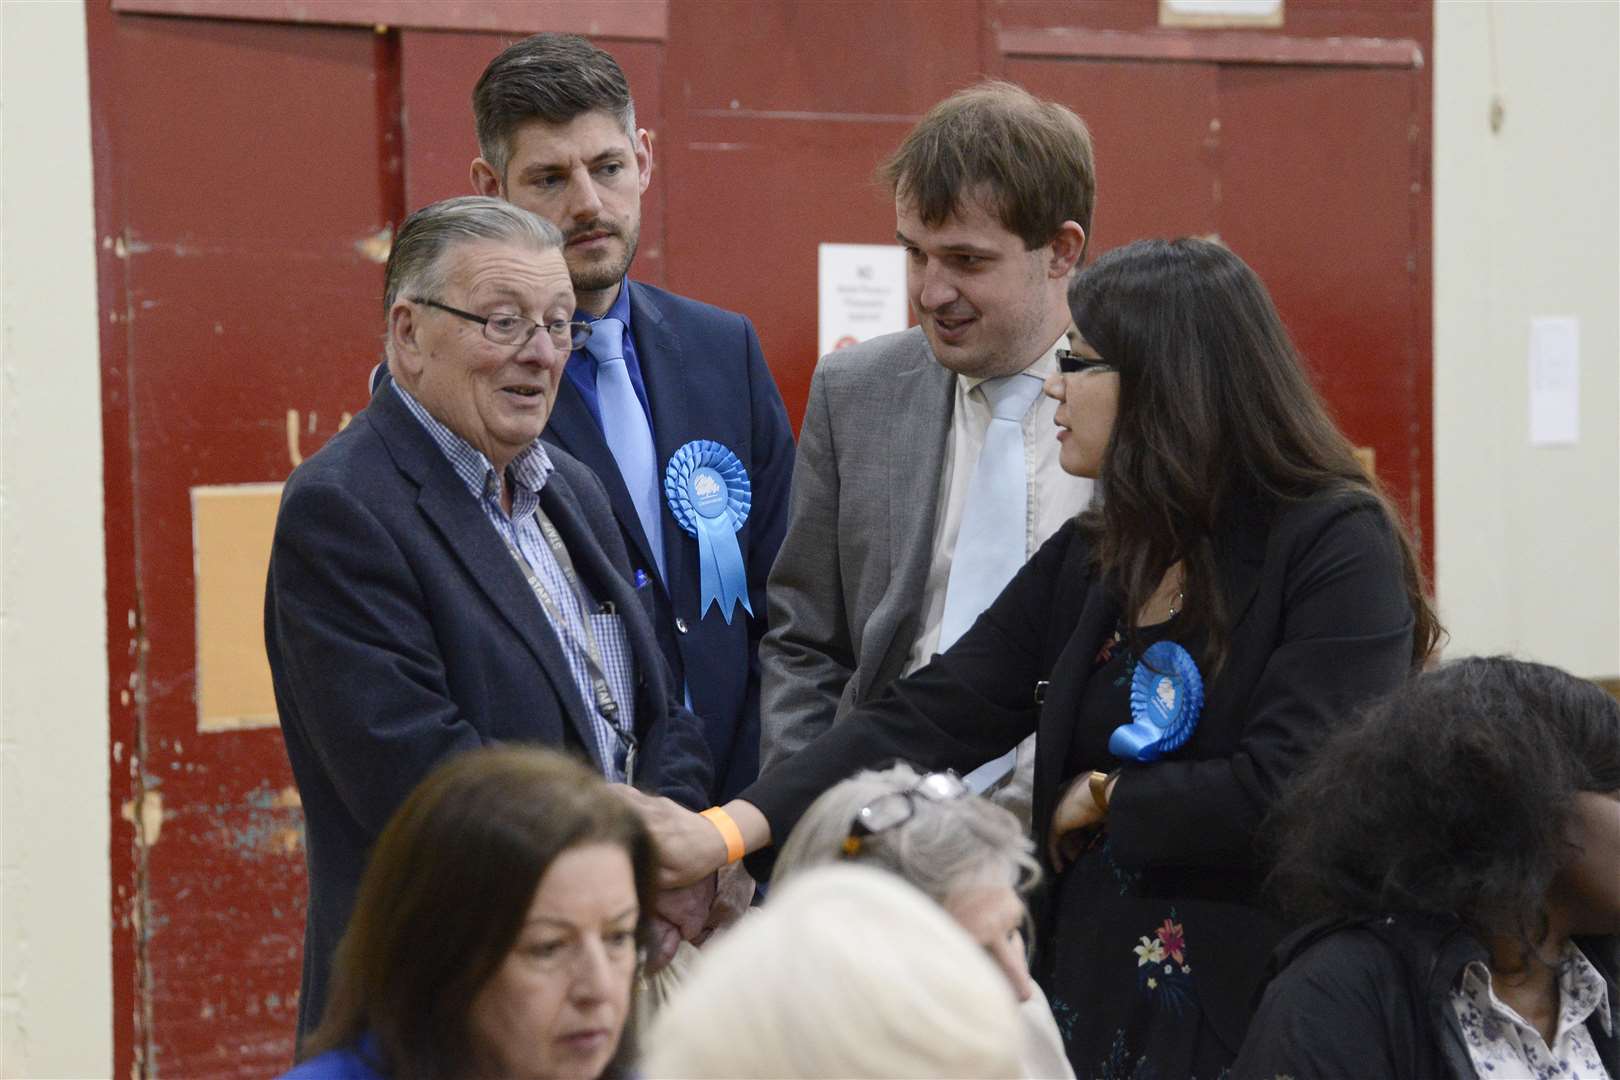 A disappointed Mike Bennett (left) after losing his seat. Picture: Paul Amos